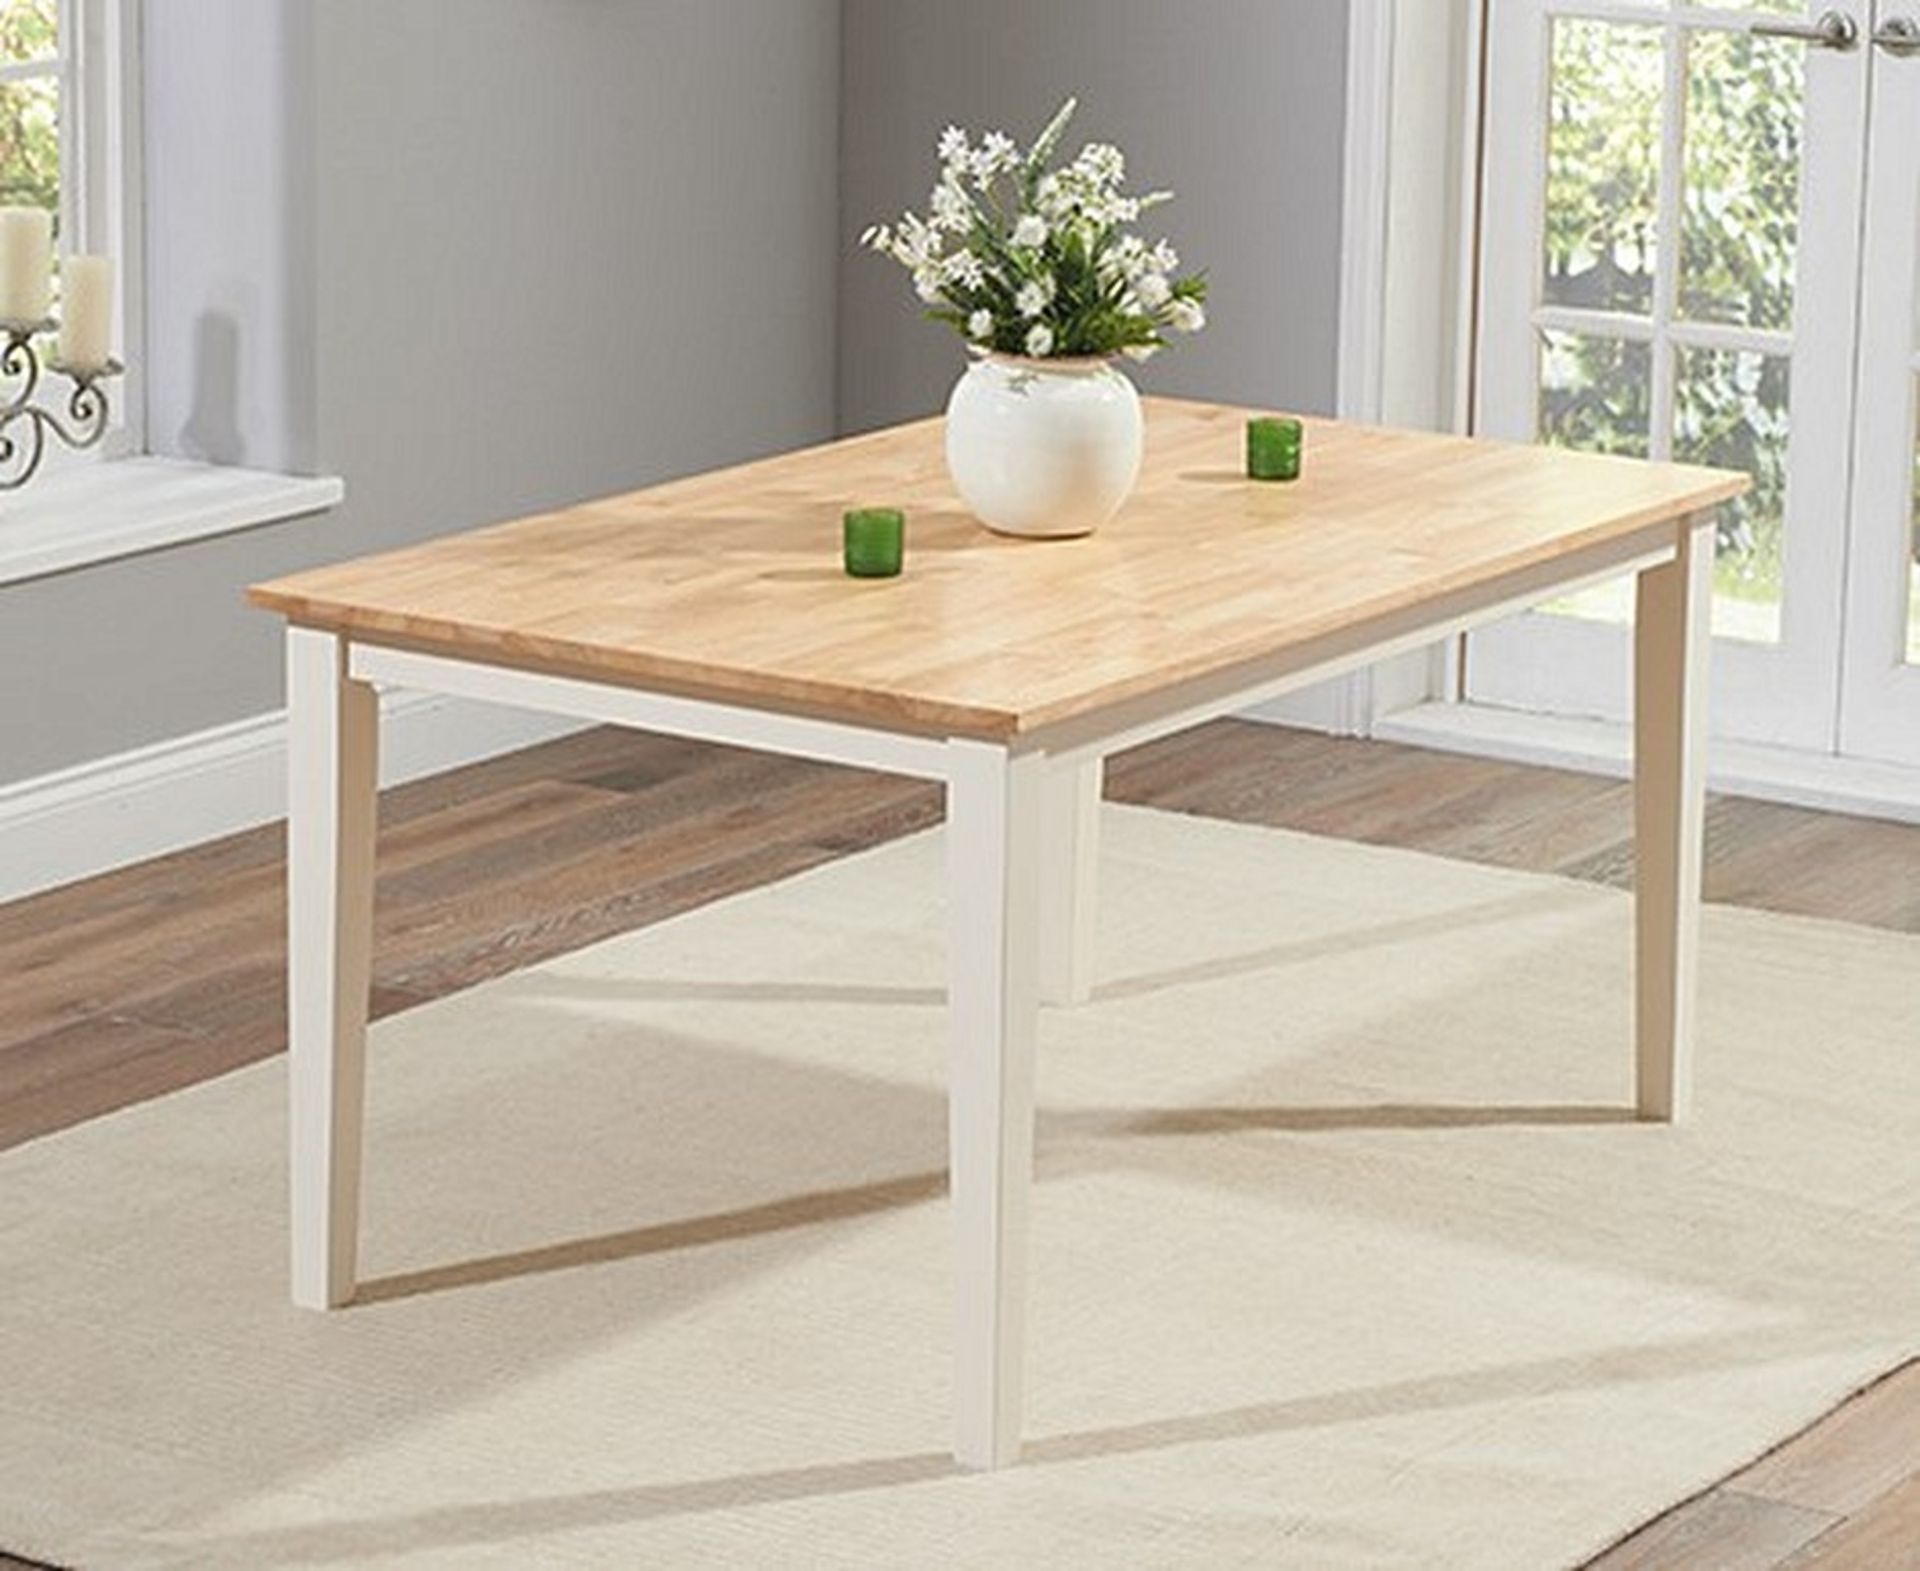 Chiltern 150cm Grey and Oak Dining Table The Chiltern collection is all about practicality and